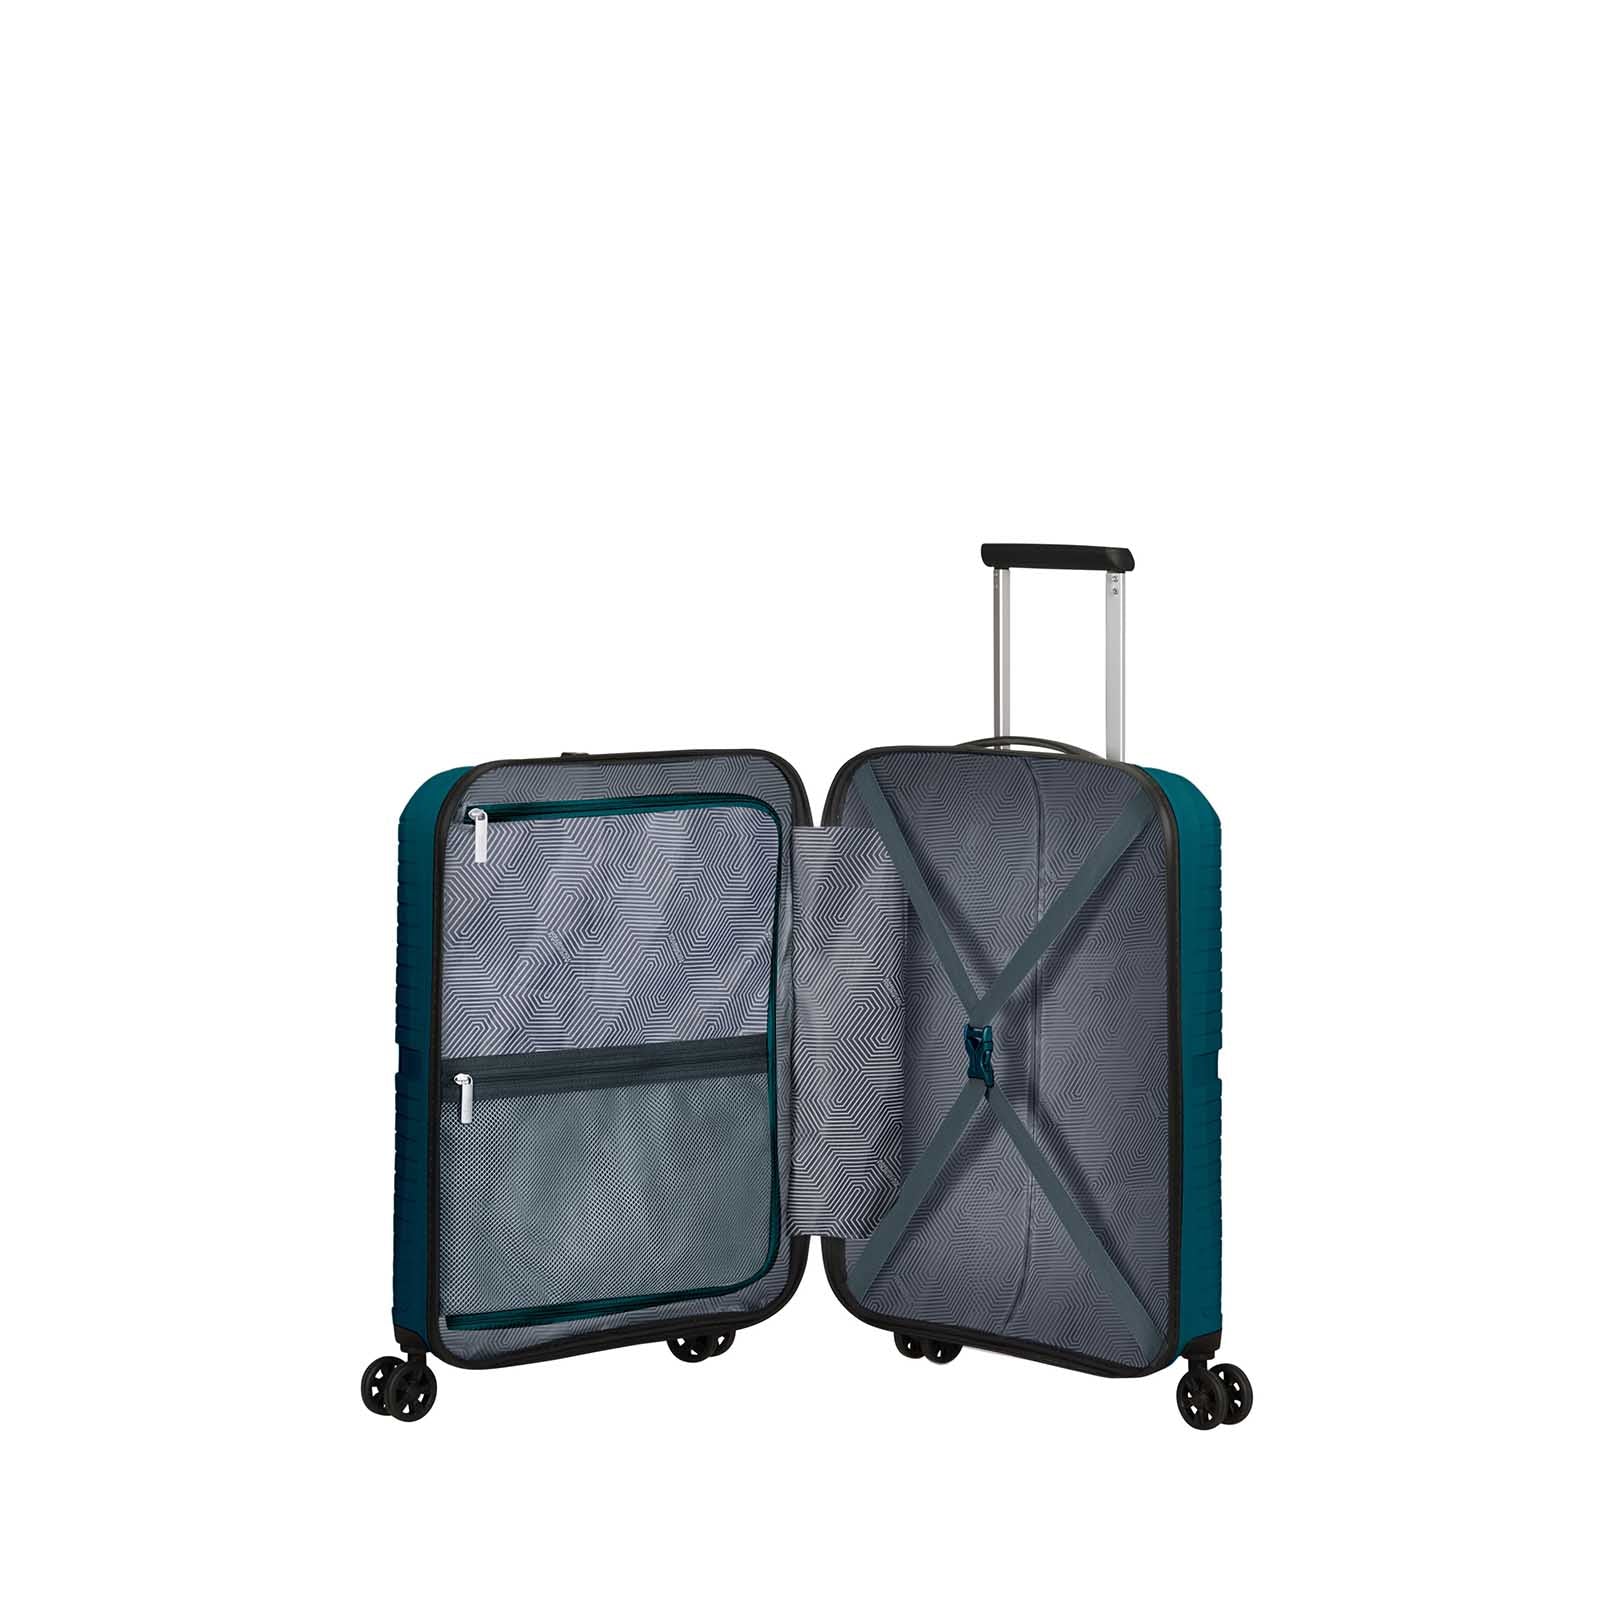 American-Tourister-Airconic-55cm-Carry-On-Suitcase-Deep-Ocean-Open